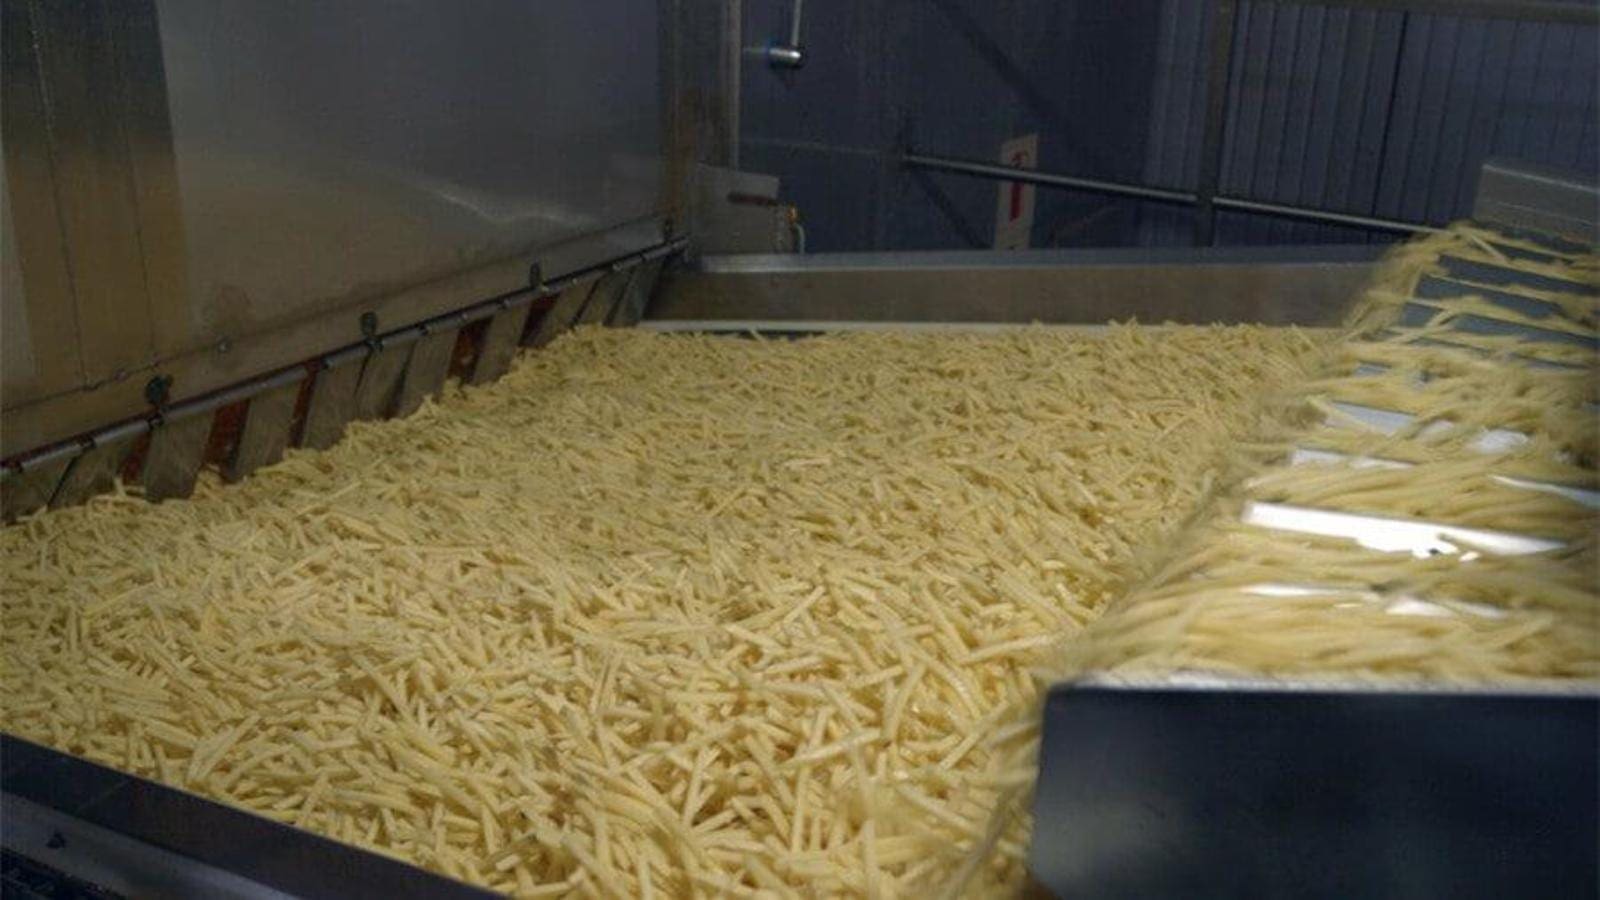 Canadian frozen food company McCain invests US$200m in development of new potato plant in China